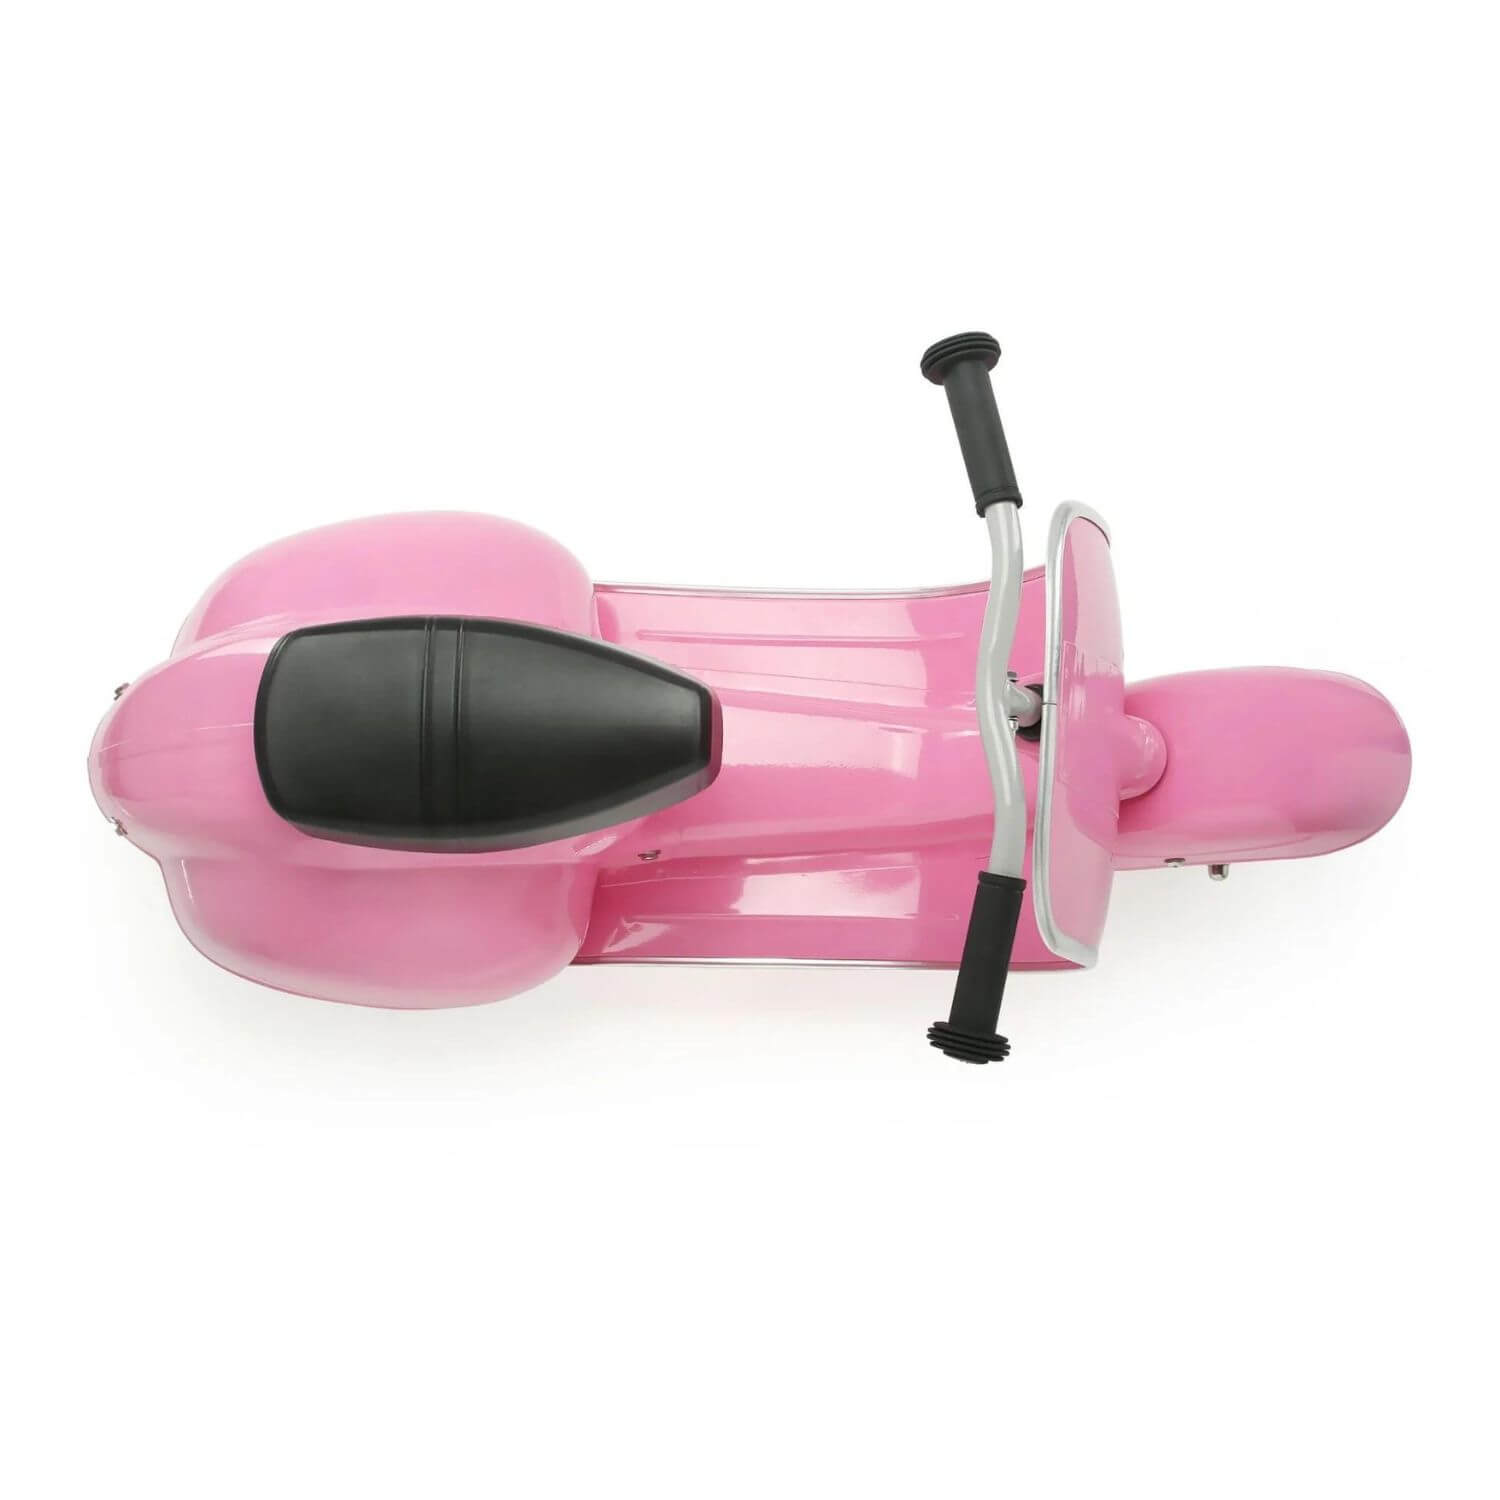 Primo Basic Ride-On with Plastic Seat Pink - Topview